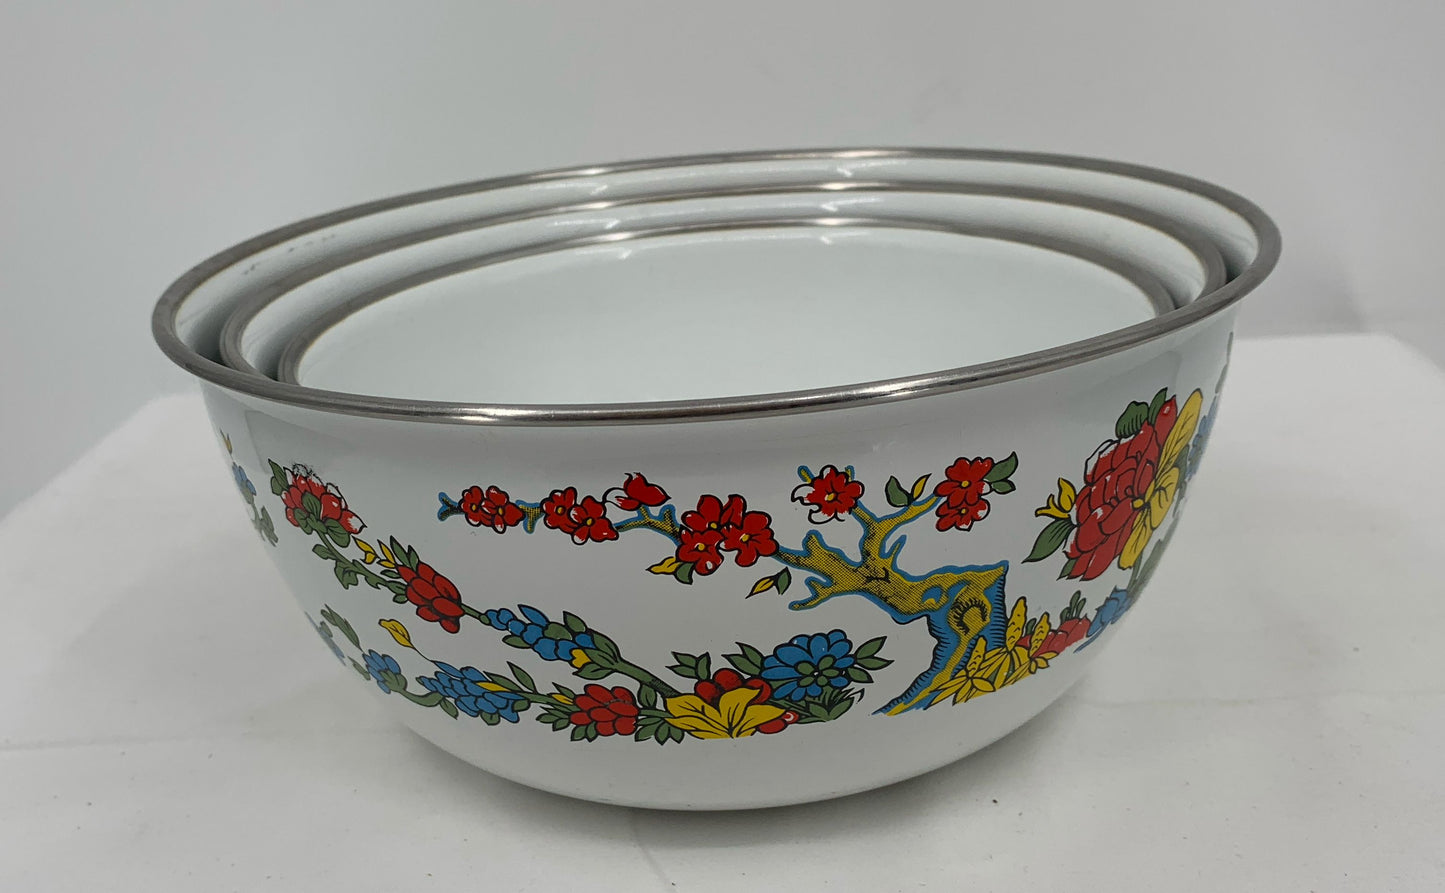 Vintage Enamelware Nesting Mixing Bowls Set Of 3 Red Yellow Blue Flowers 8.75"